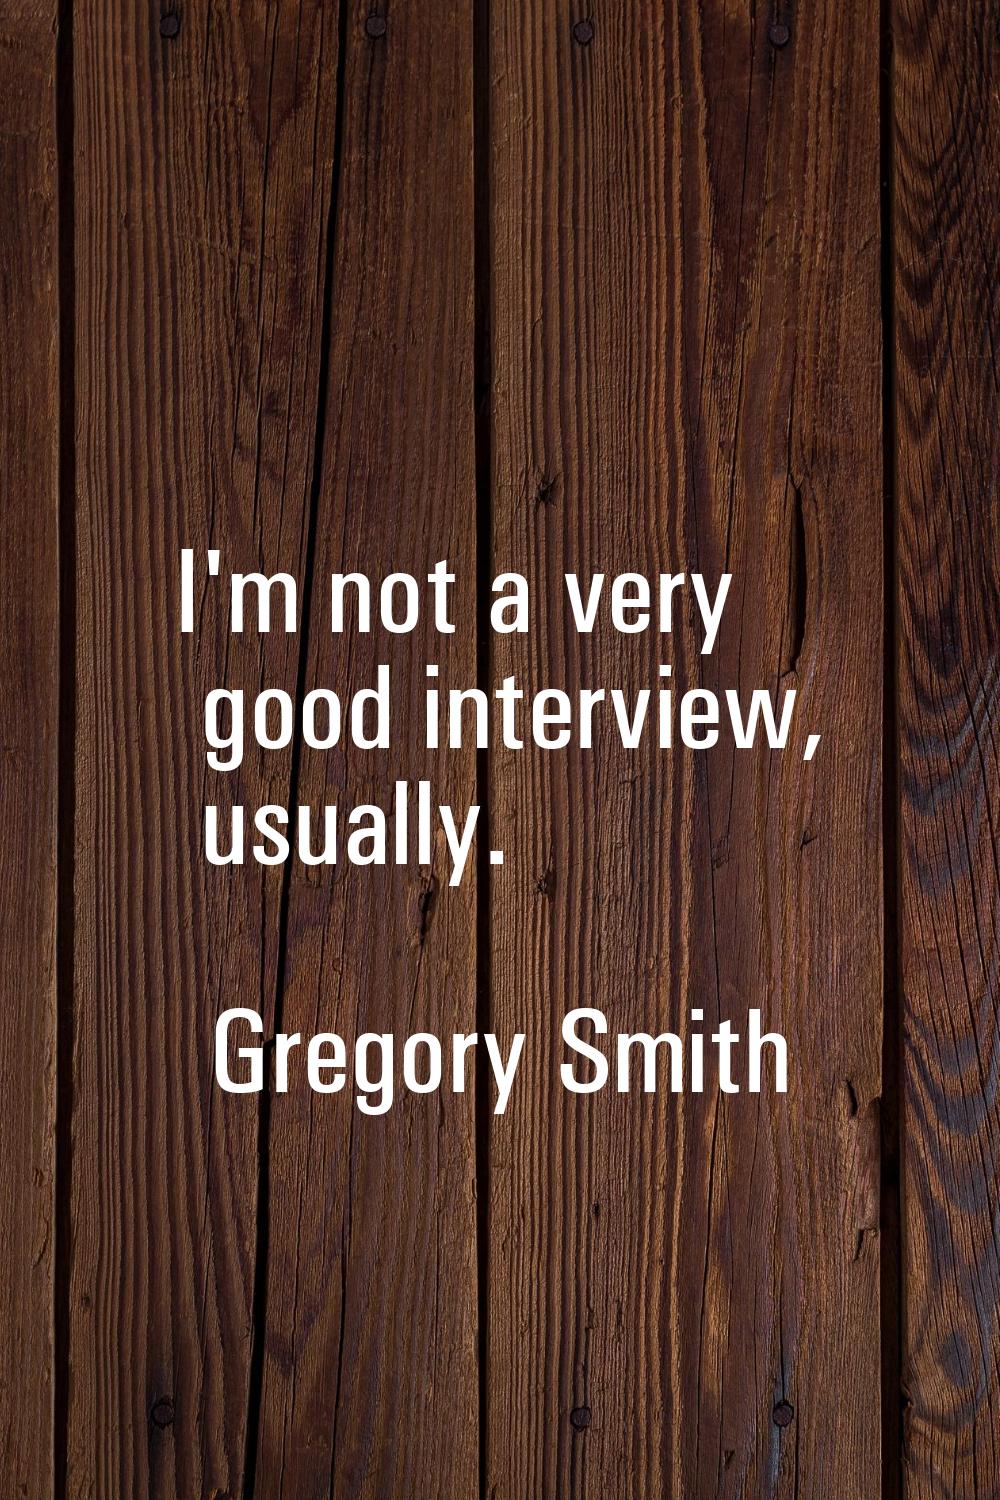 I'm not a very good interview, usually.